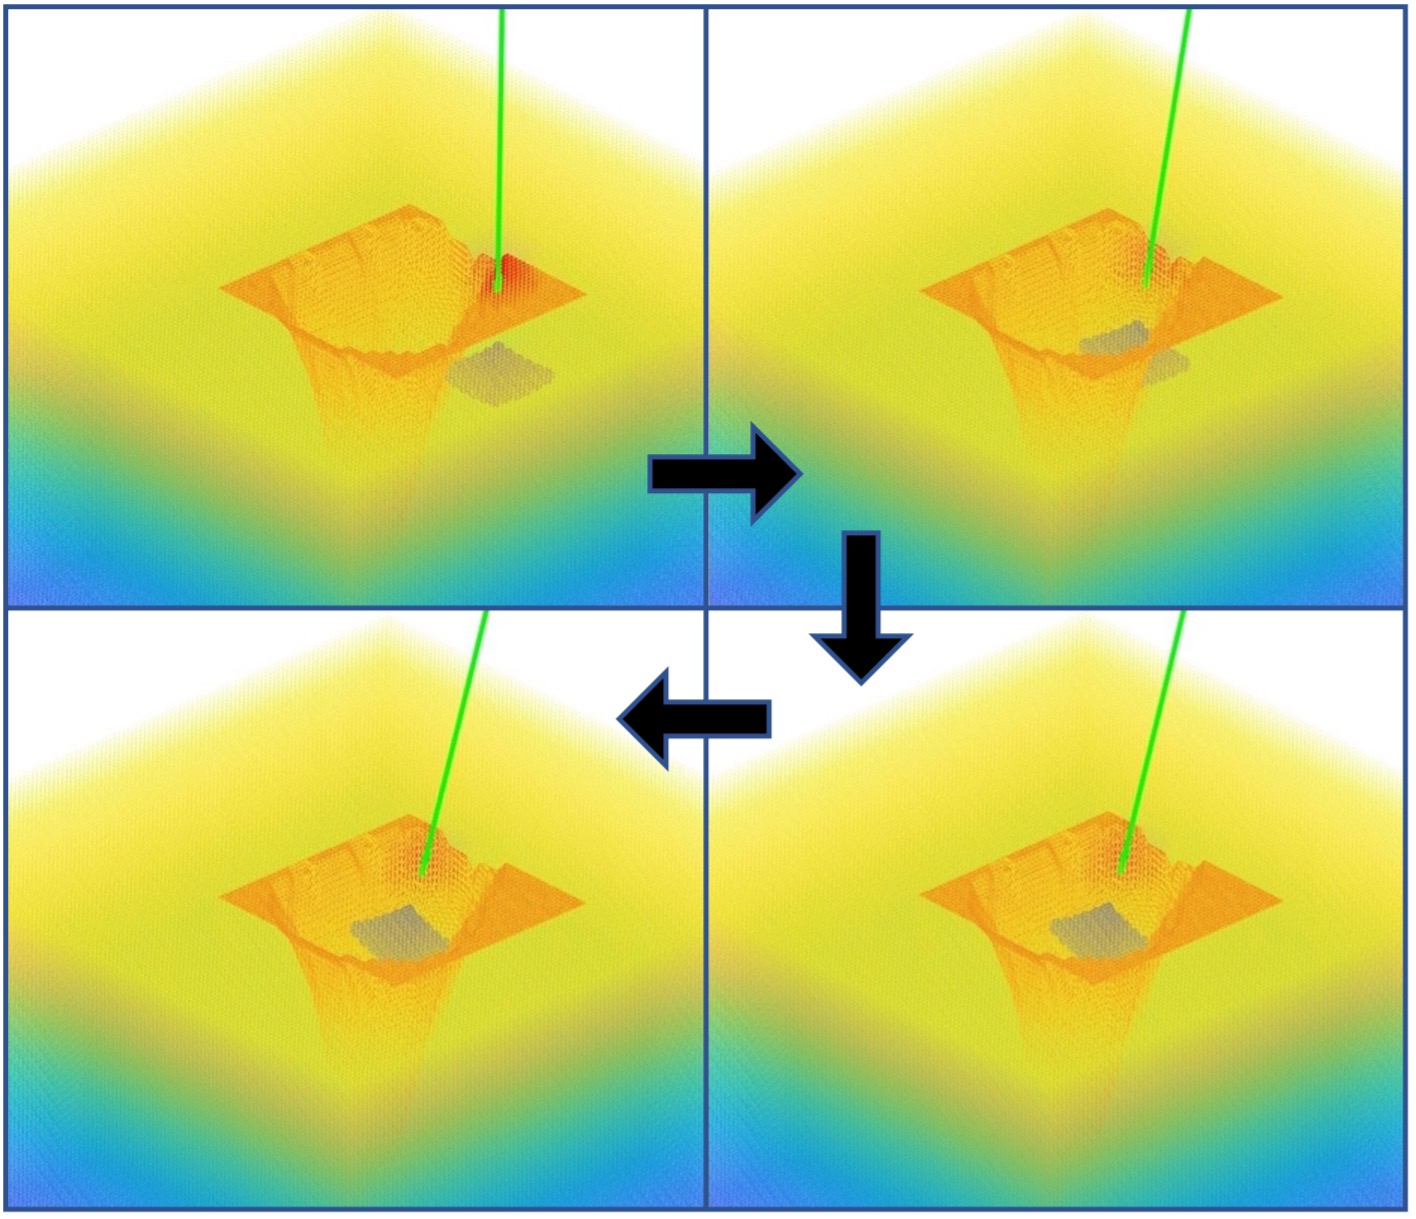 Step-by-step process of how technology maps out boundary and depth in tissue. (source: inventor)